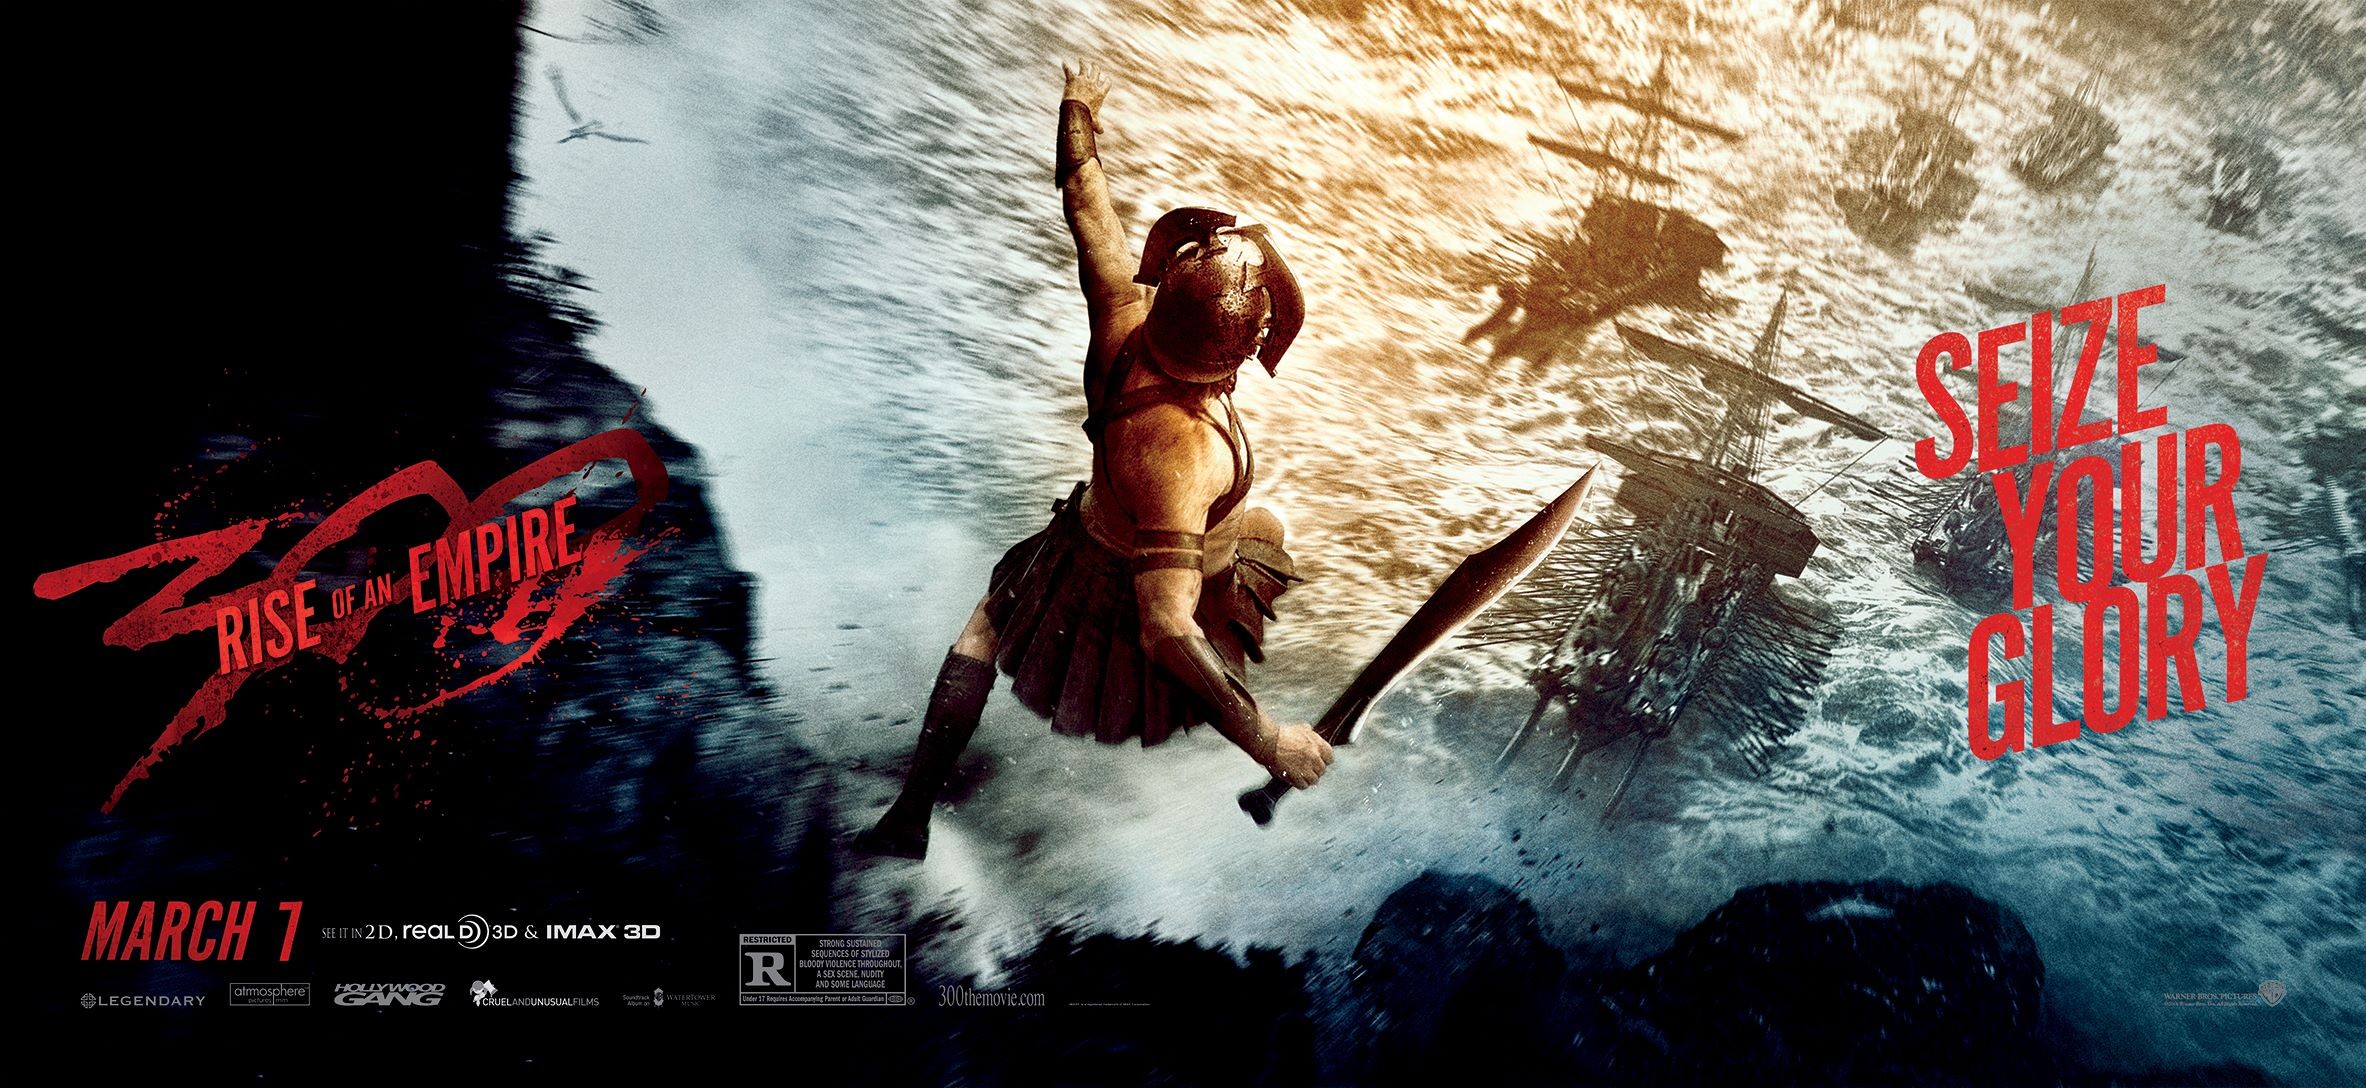 Mega Sized Movie Poster Image for 300: Rise of an Empire (#17 of 20)